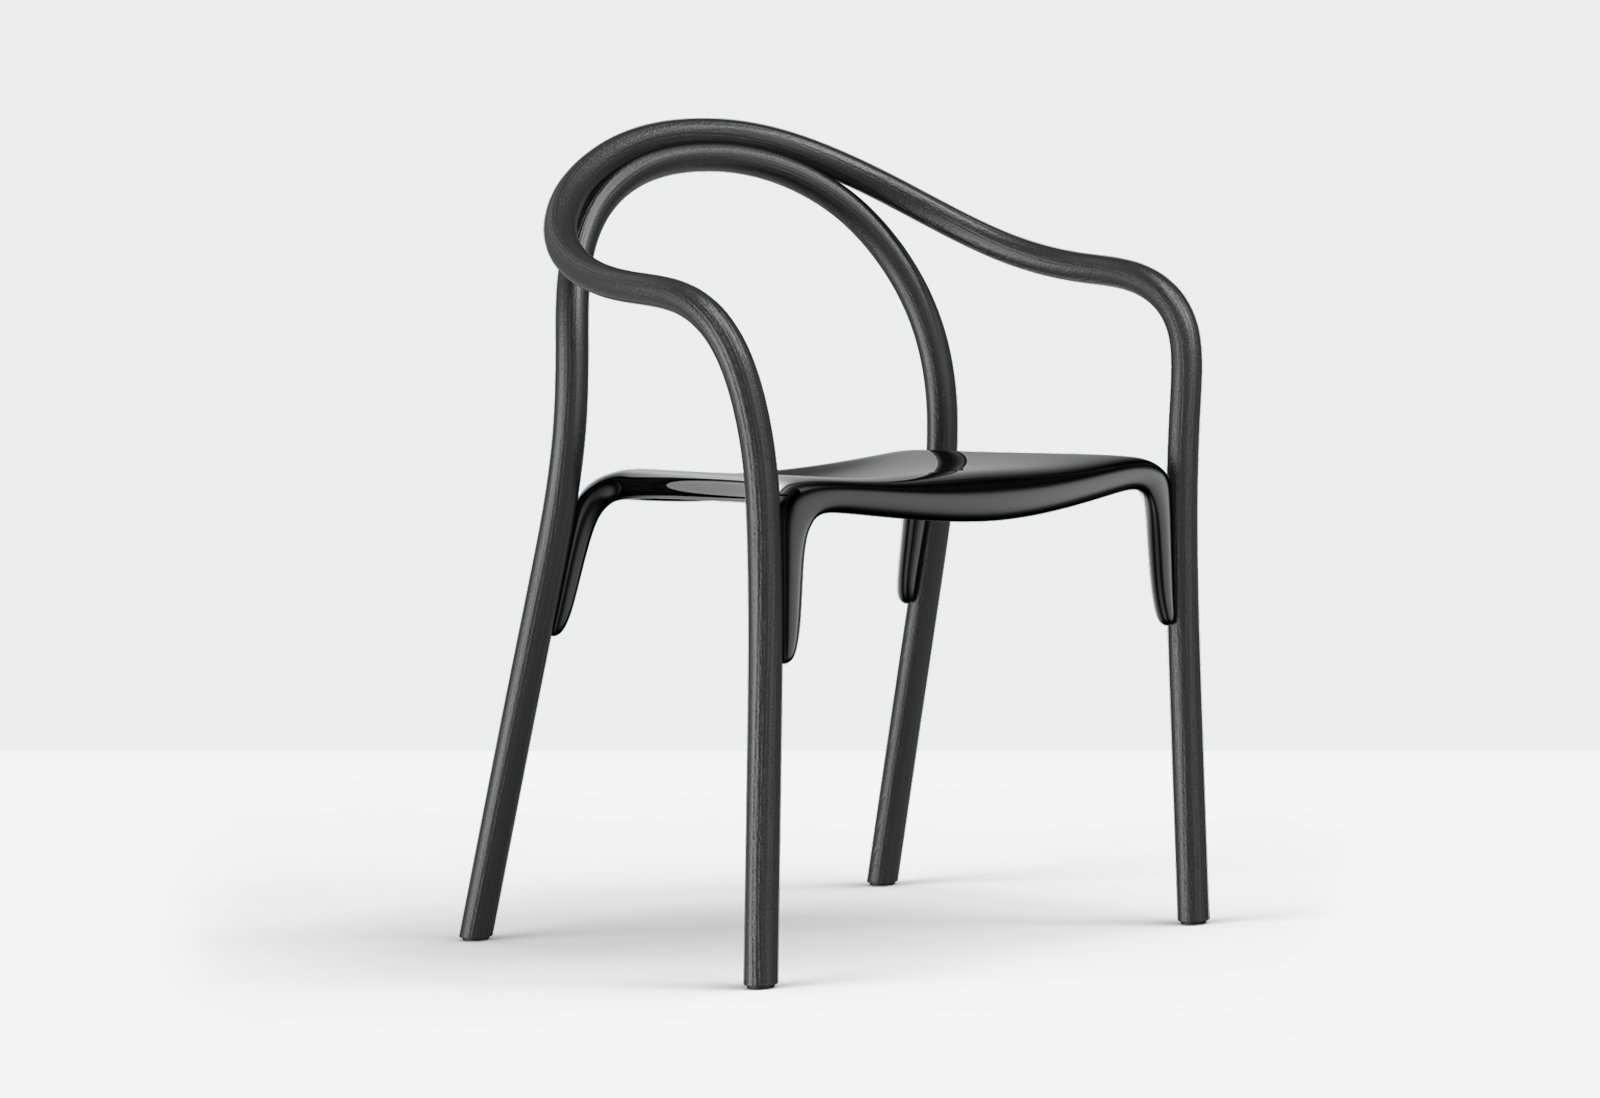 Soul Chair from Pedrali, designed by Eugeni Quitllet